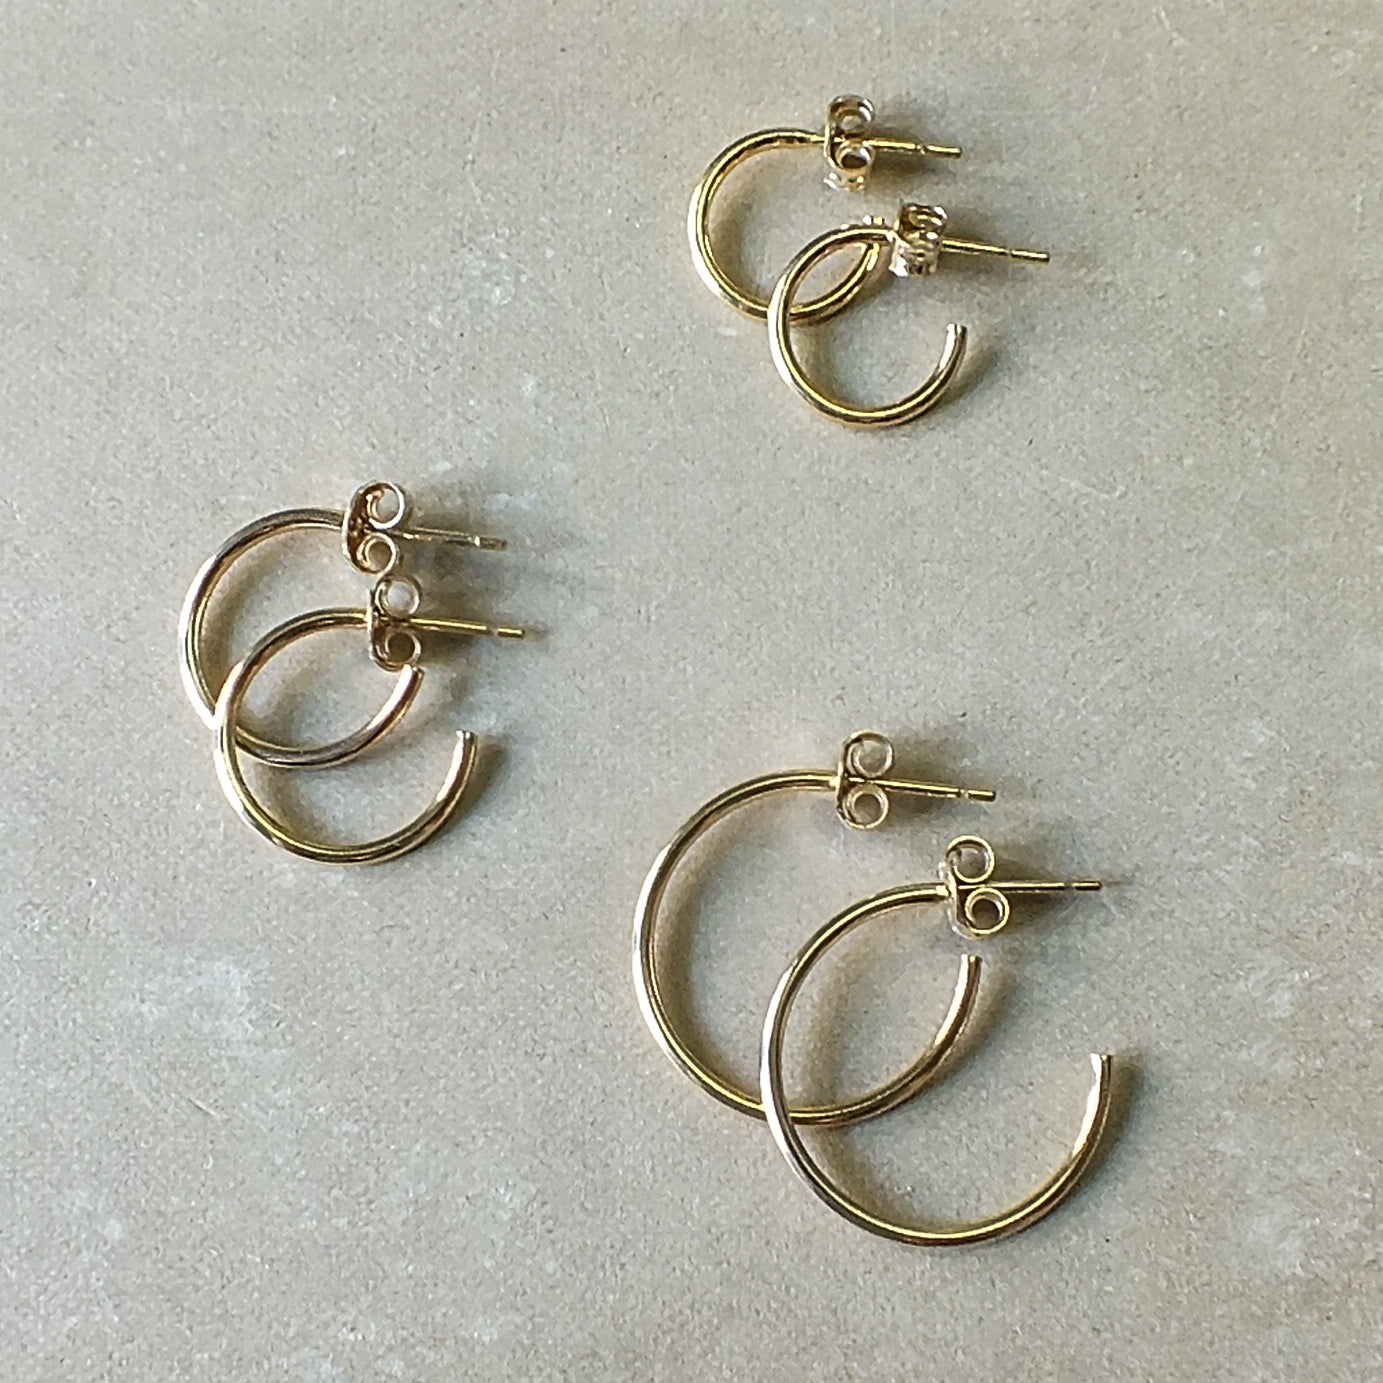 A set of four Becoming Jewelry Open Hoop Earrings, medium on a gray background.